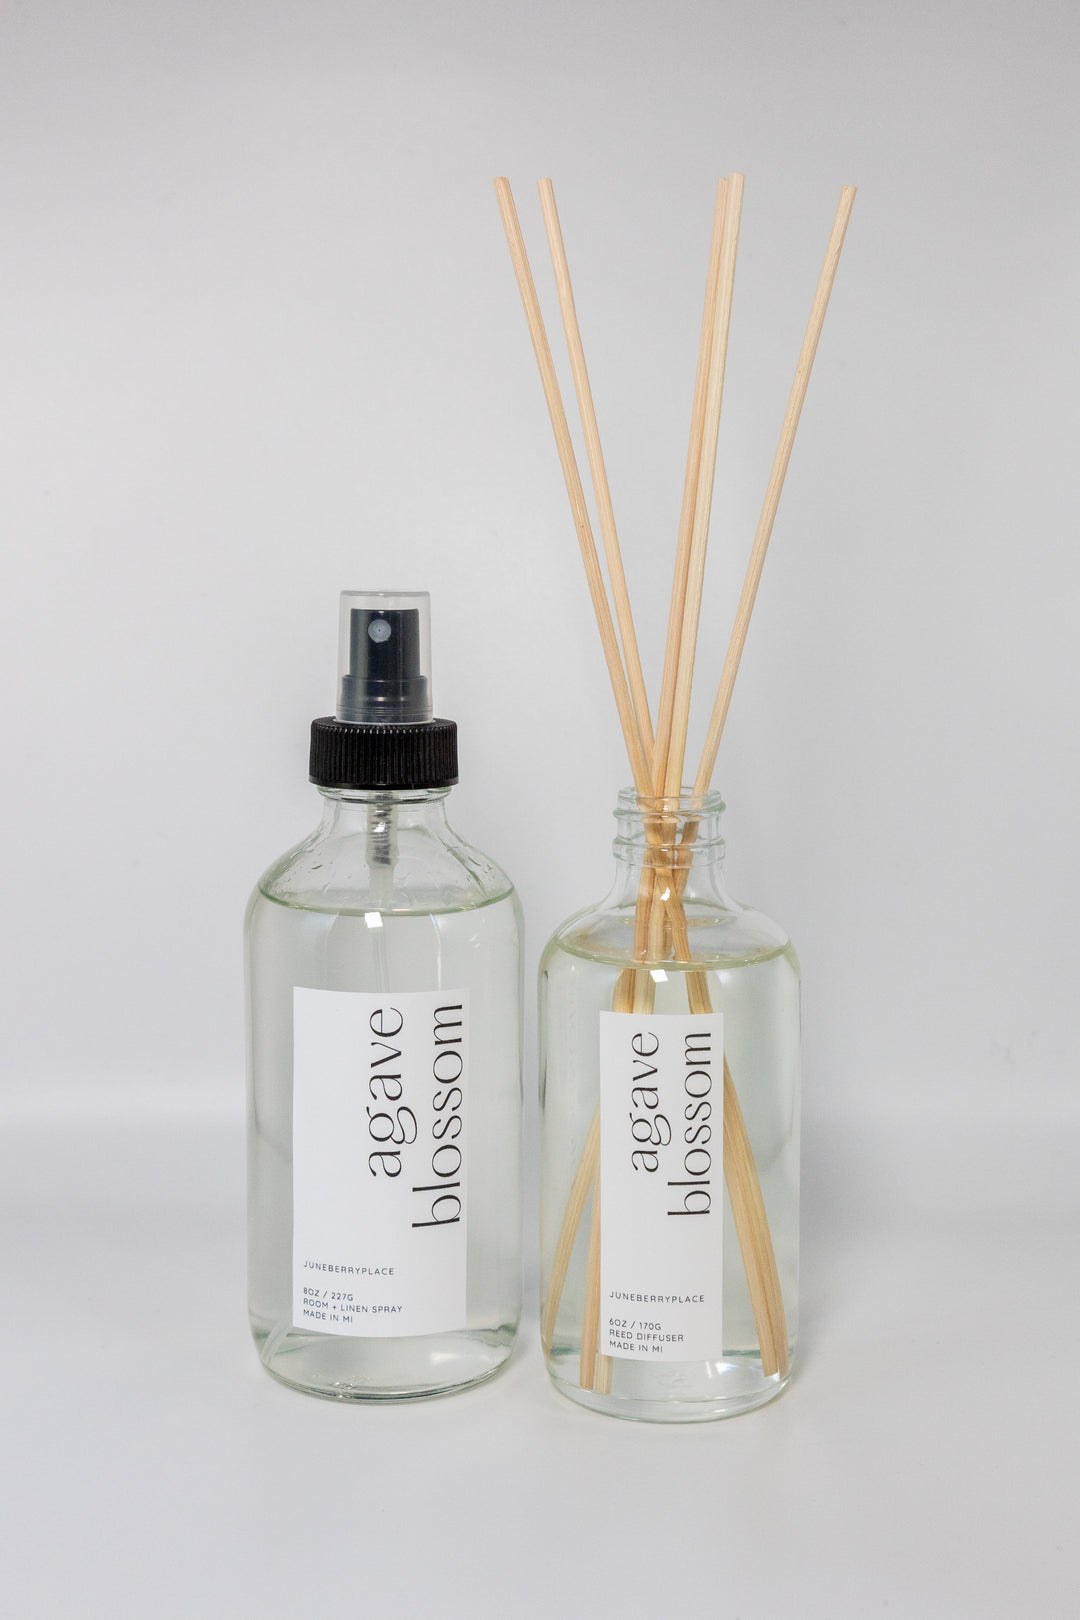 Agave Blossom Reed Diffuser and Room + Linen Sprays - Spring Collection in glass bottles by juneberryplace home fragrances